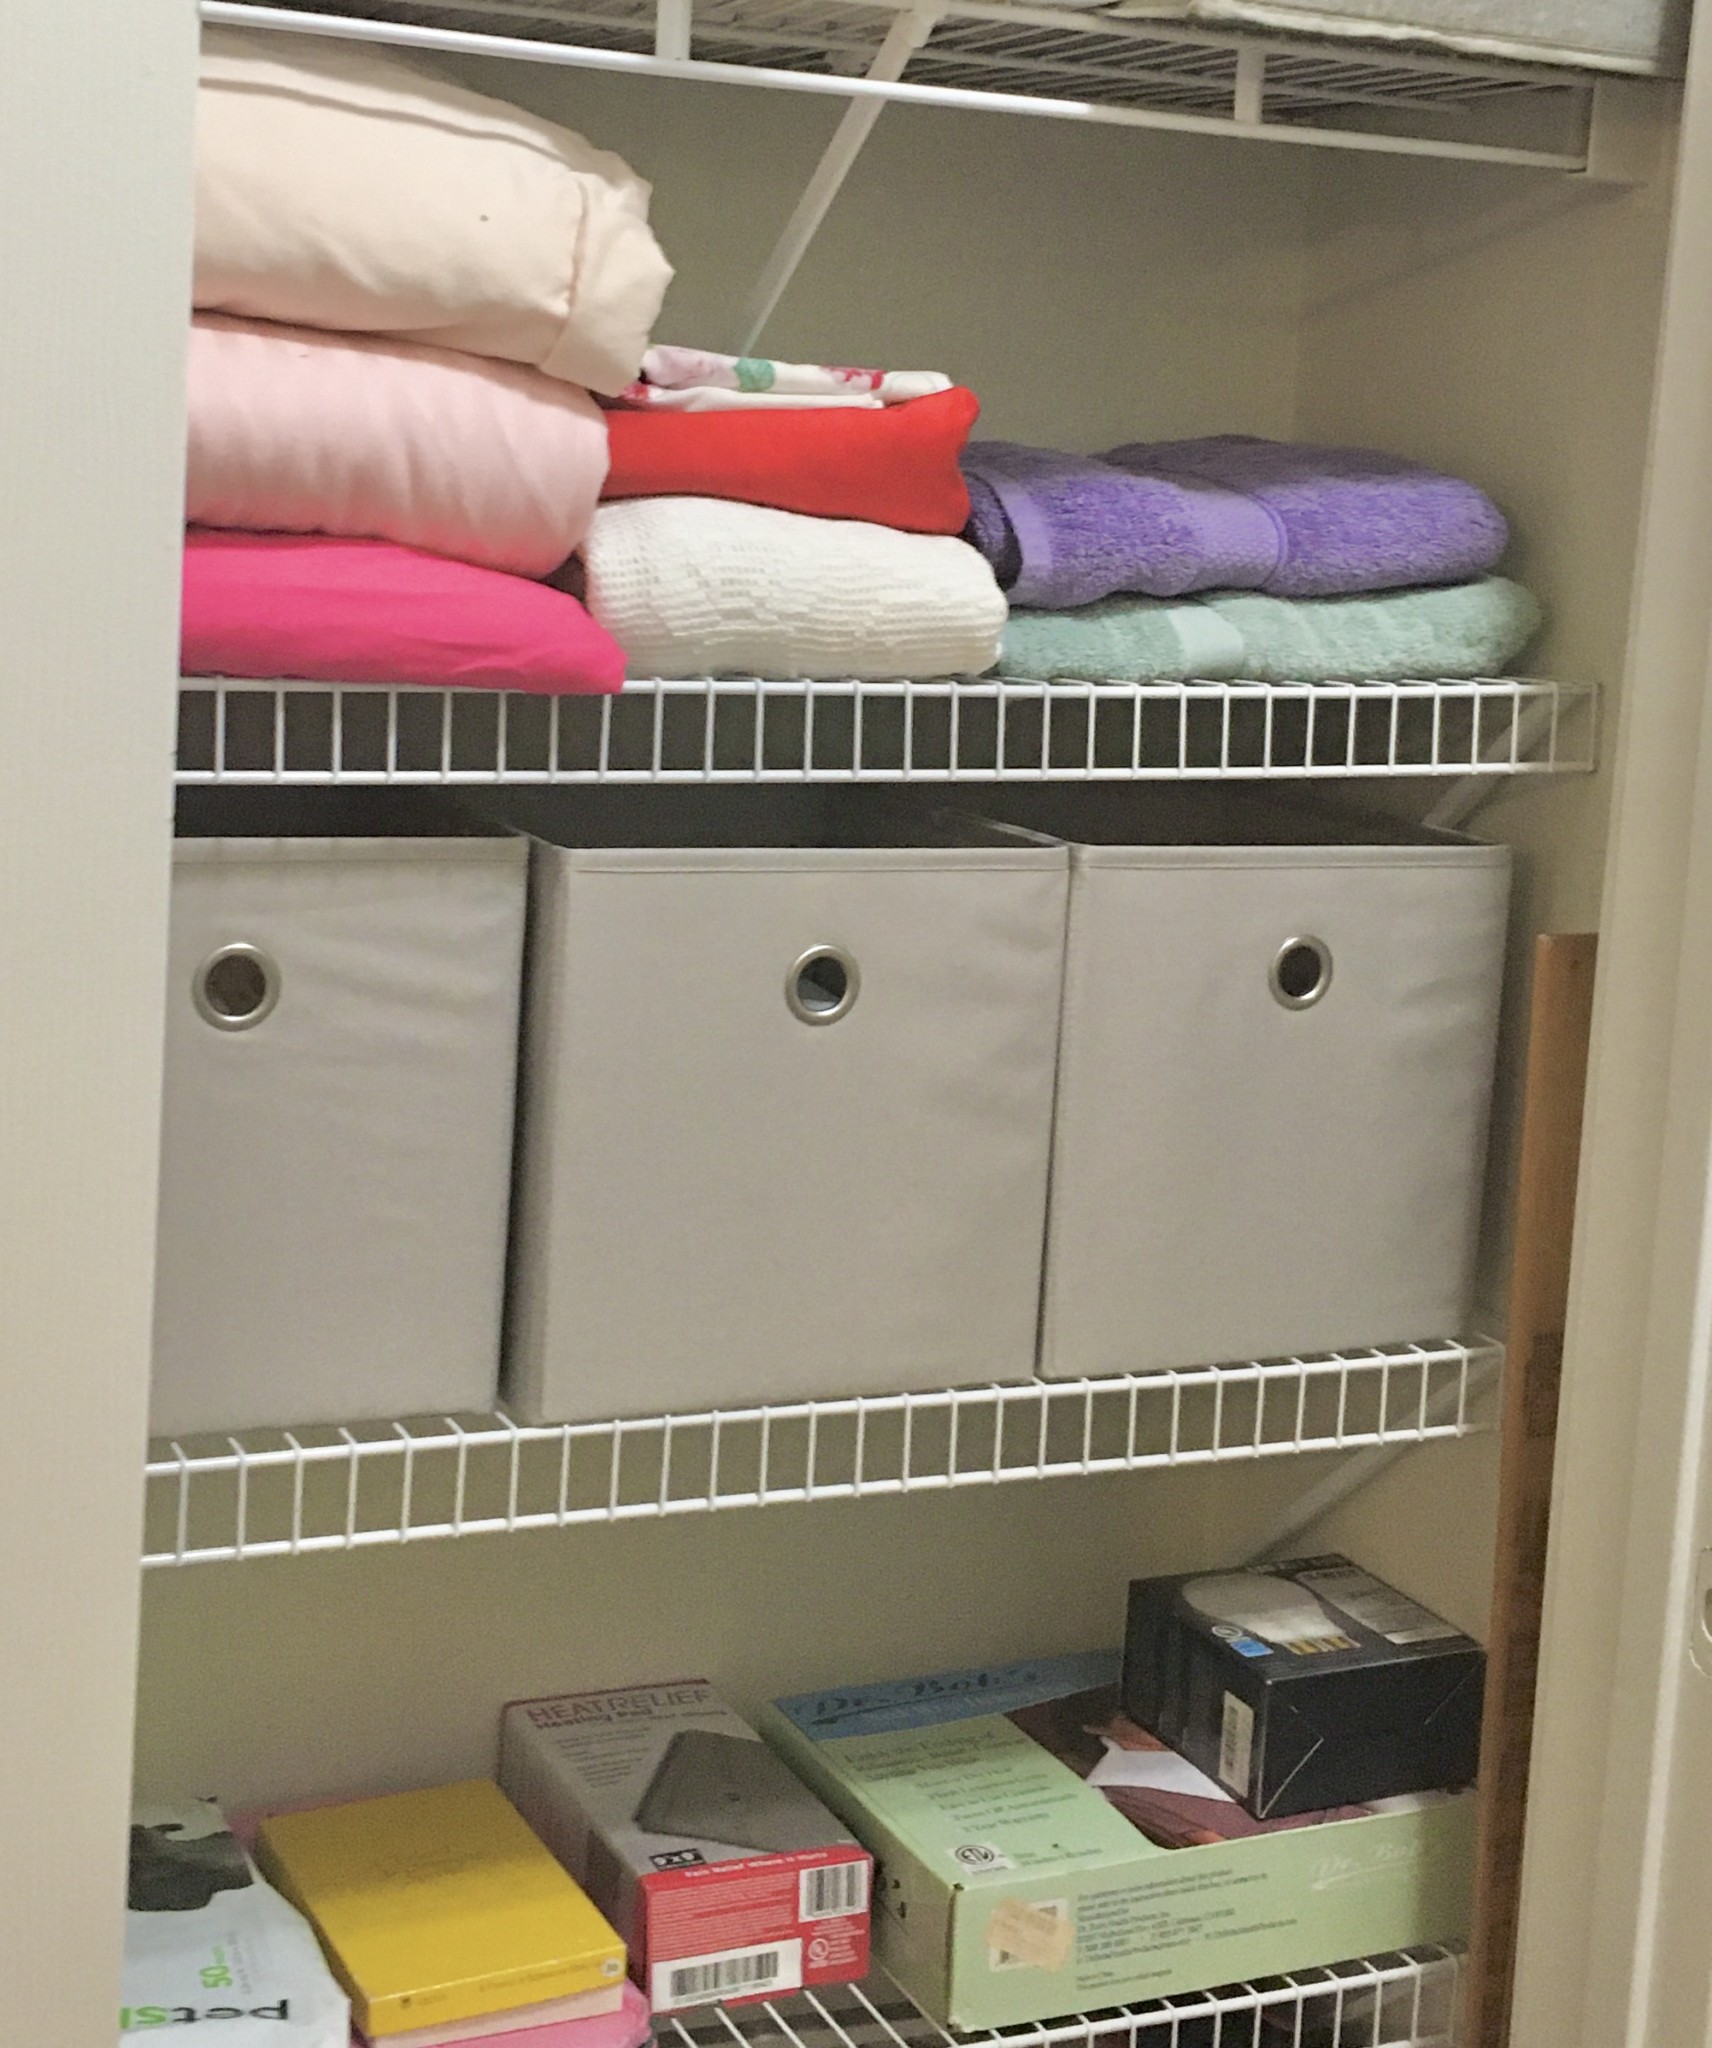 Tomball home organizing services - linen after